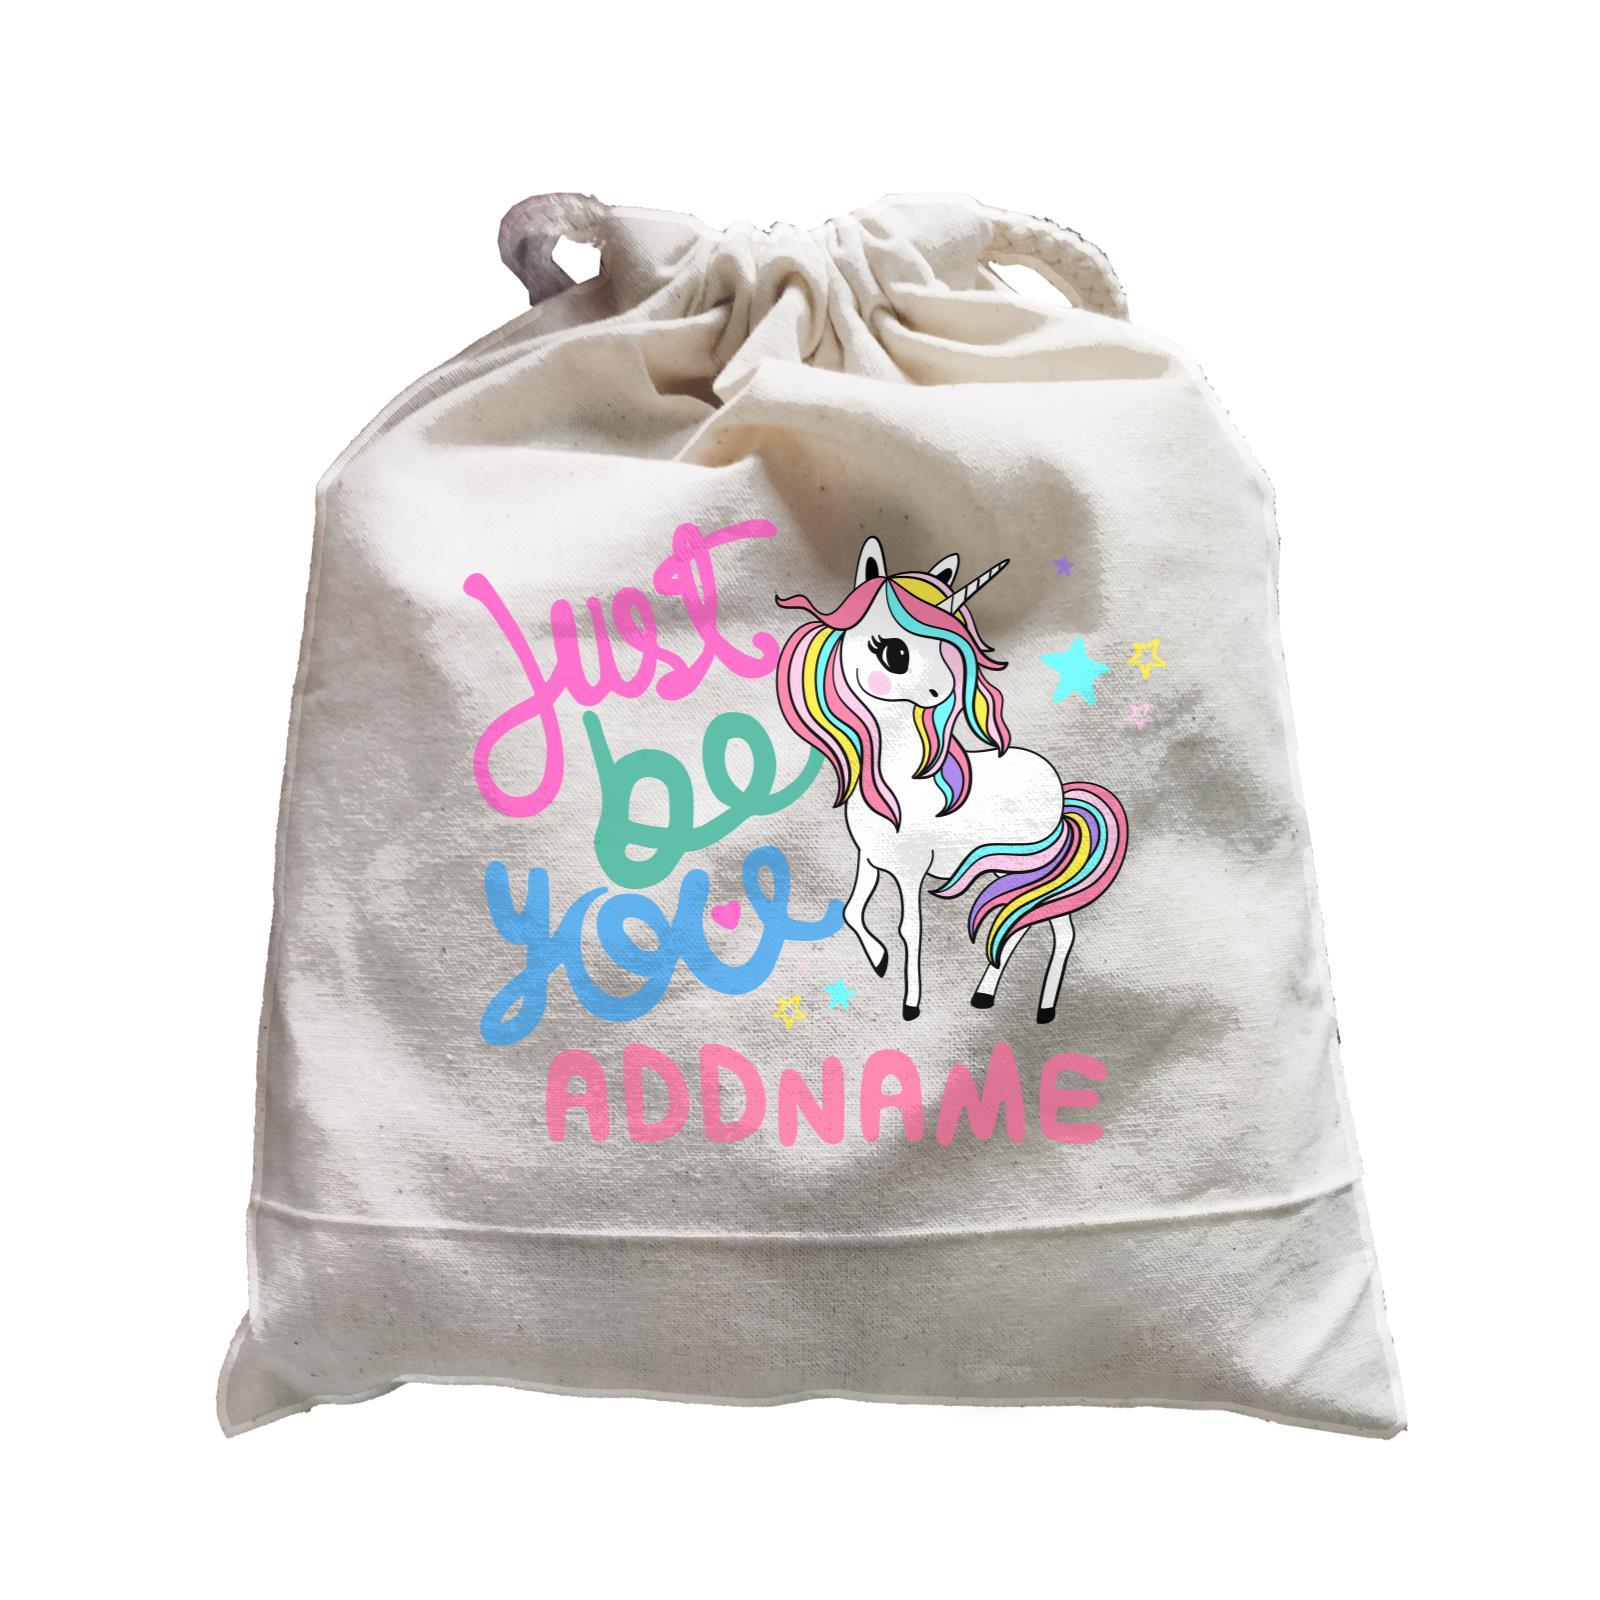 Children's Day Gift Series Just Be You Cute Unicorn Addname  Satchel